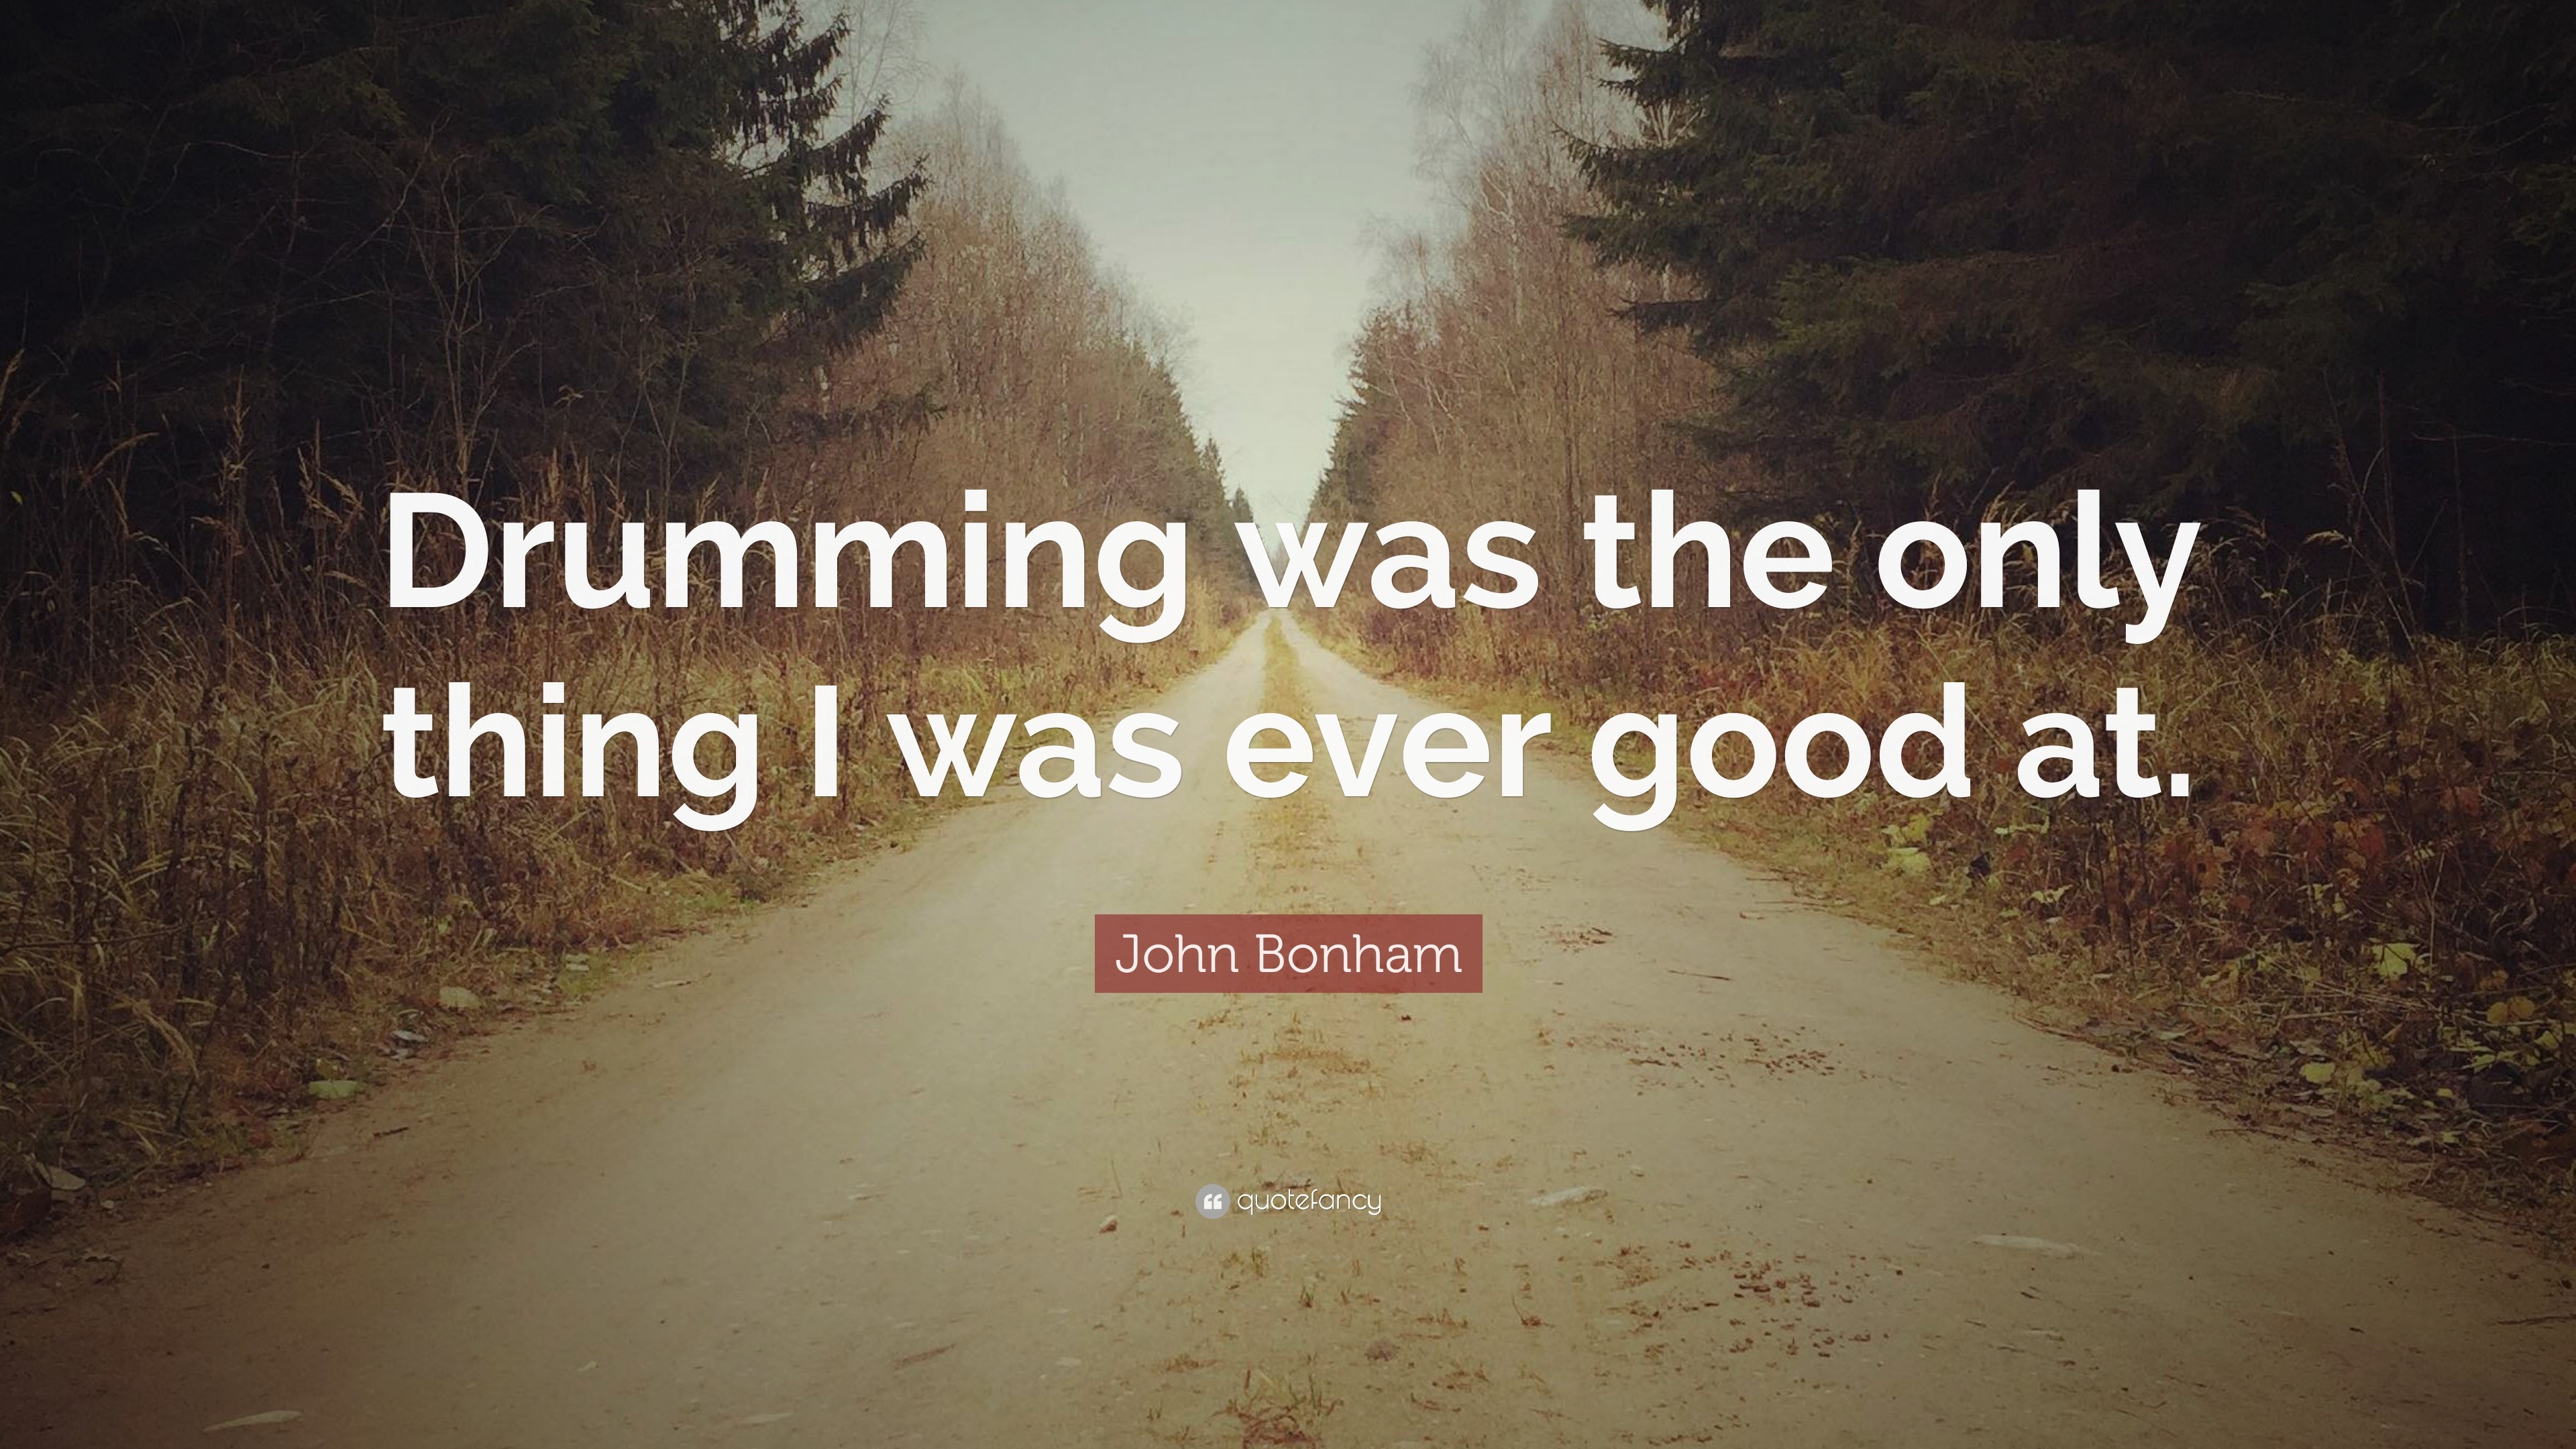 3840x2160 John Bonham Quote: “Drumming was the only thing I was ever good at.